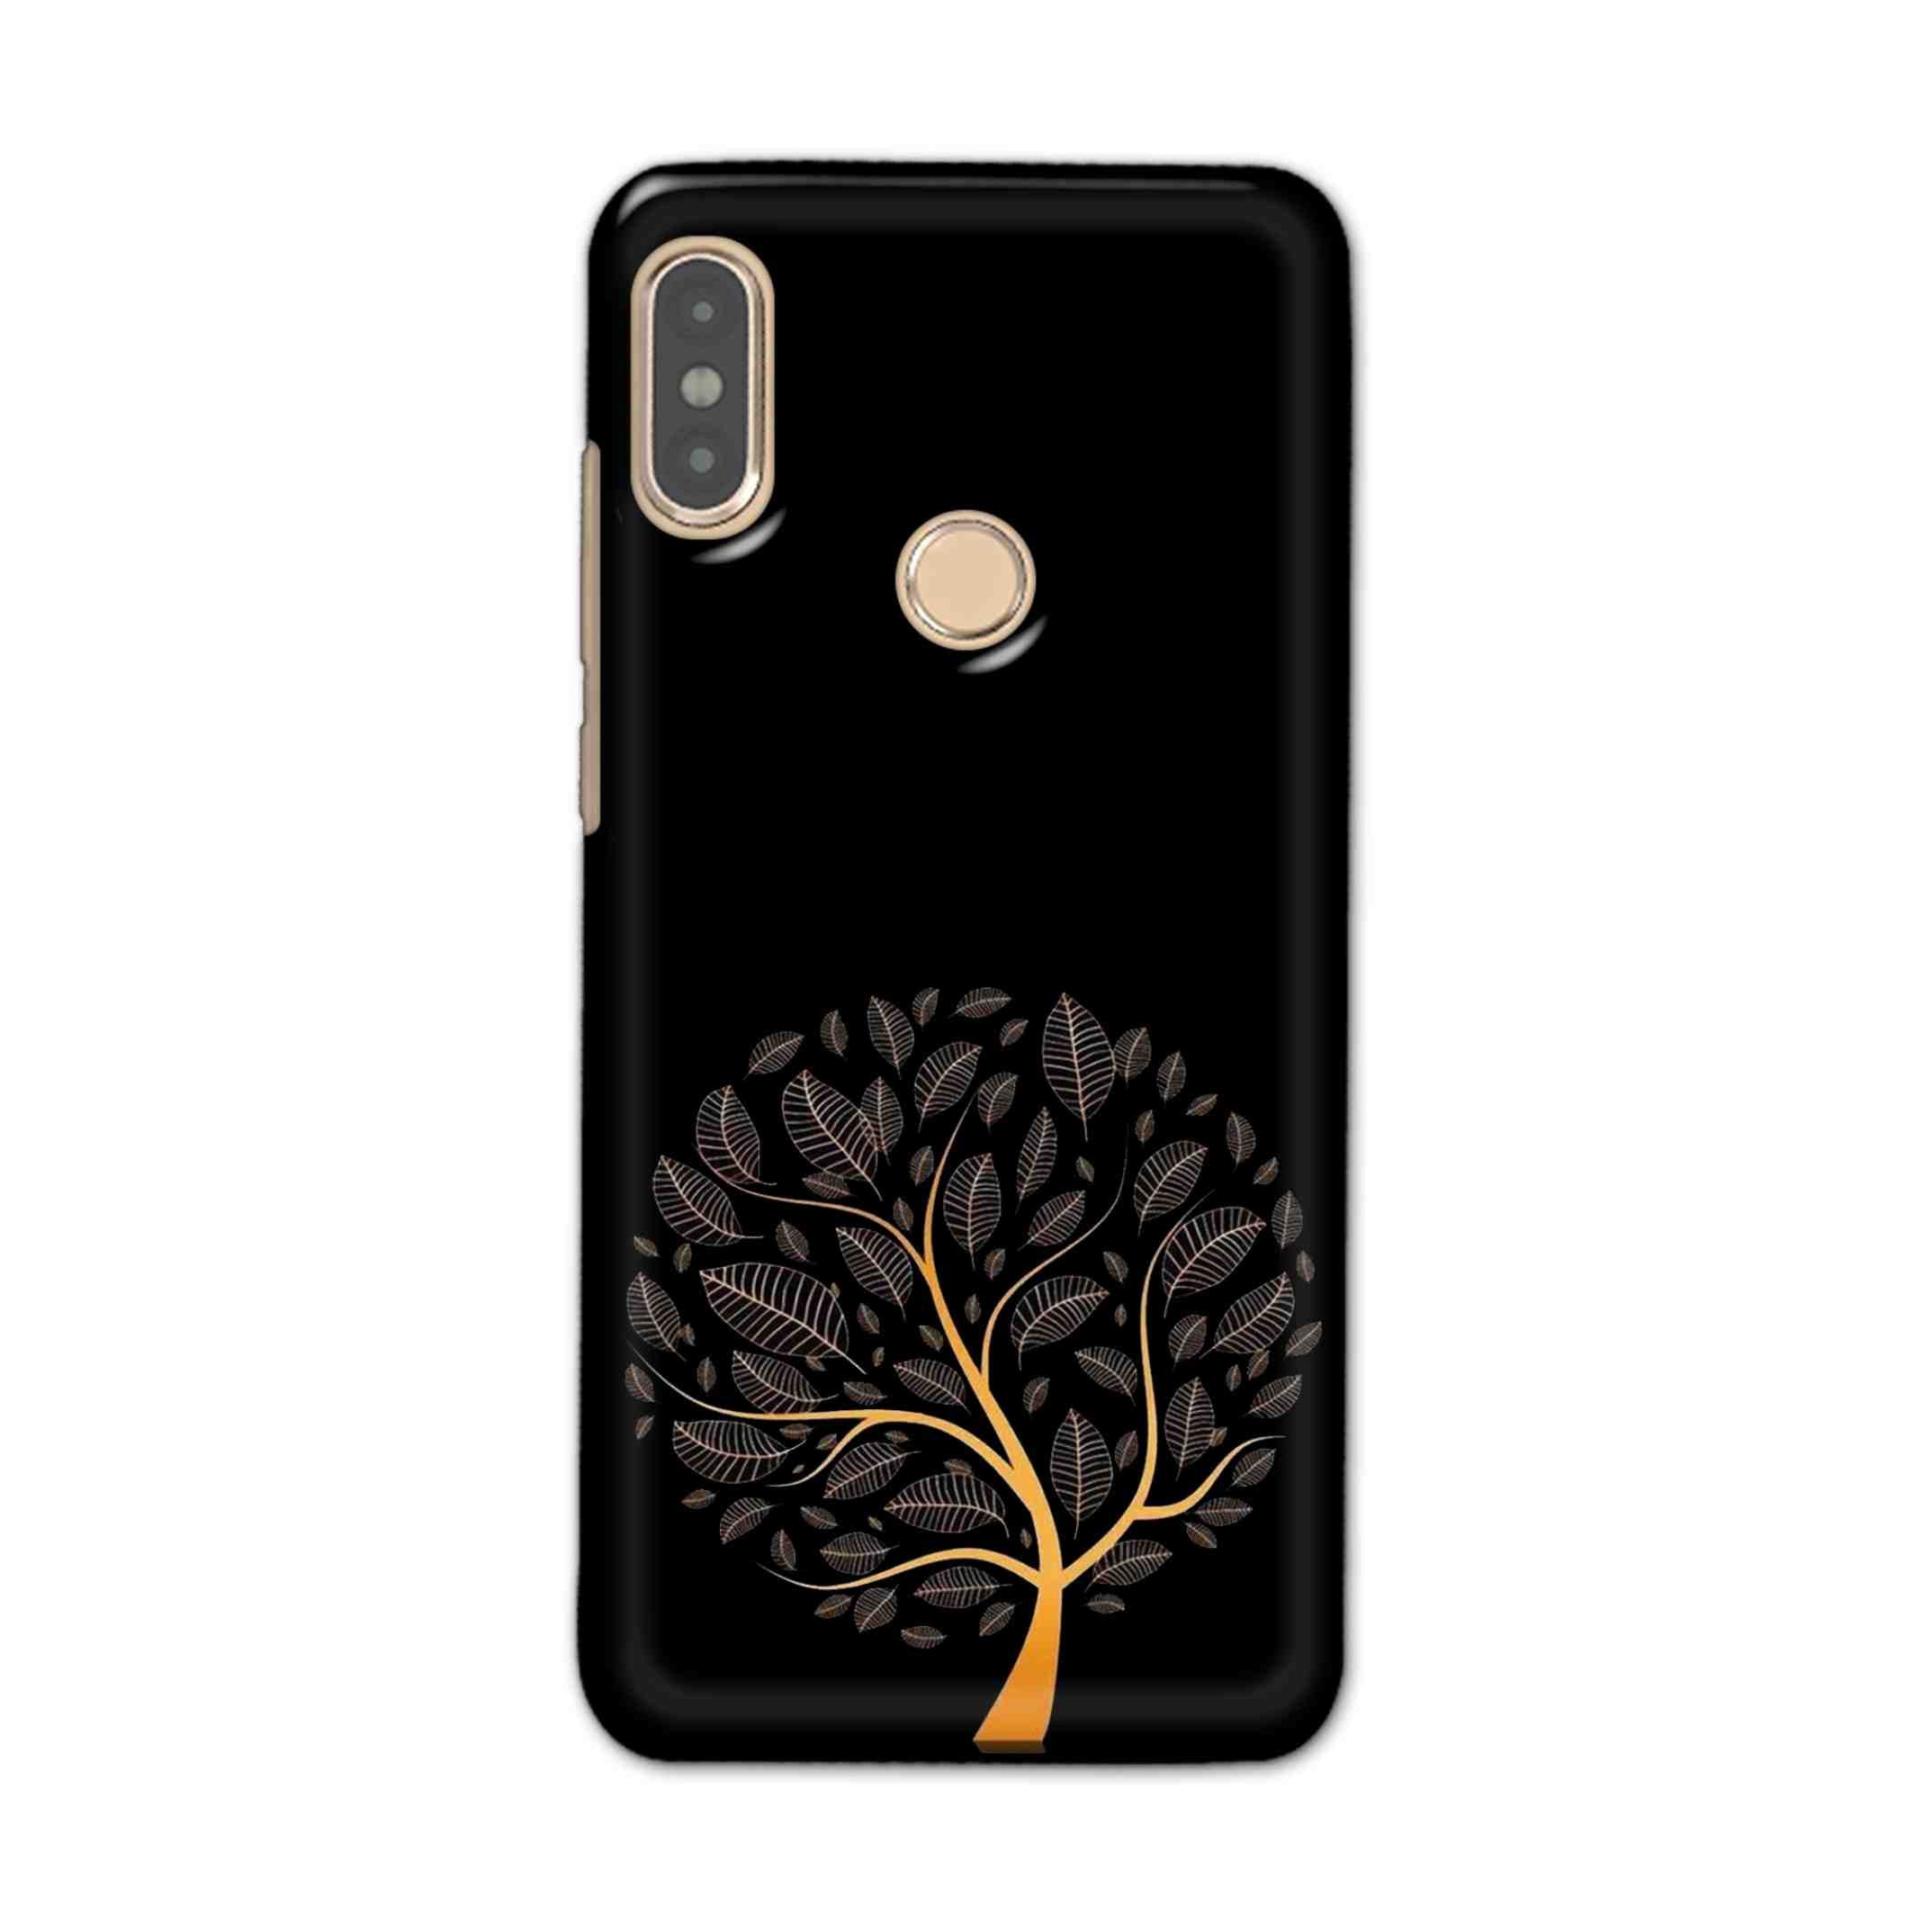 Buy Golden Tree Hard Back Mobile Phone Case Cover For Xiaomi Redmi Note 5 Pro Online